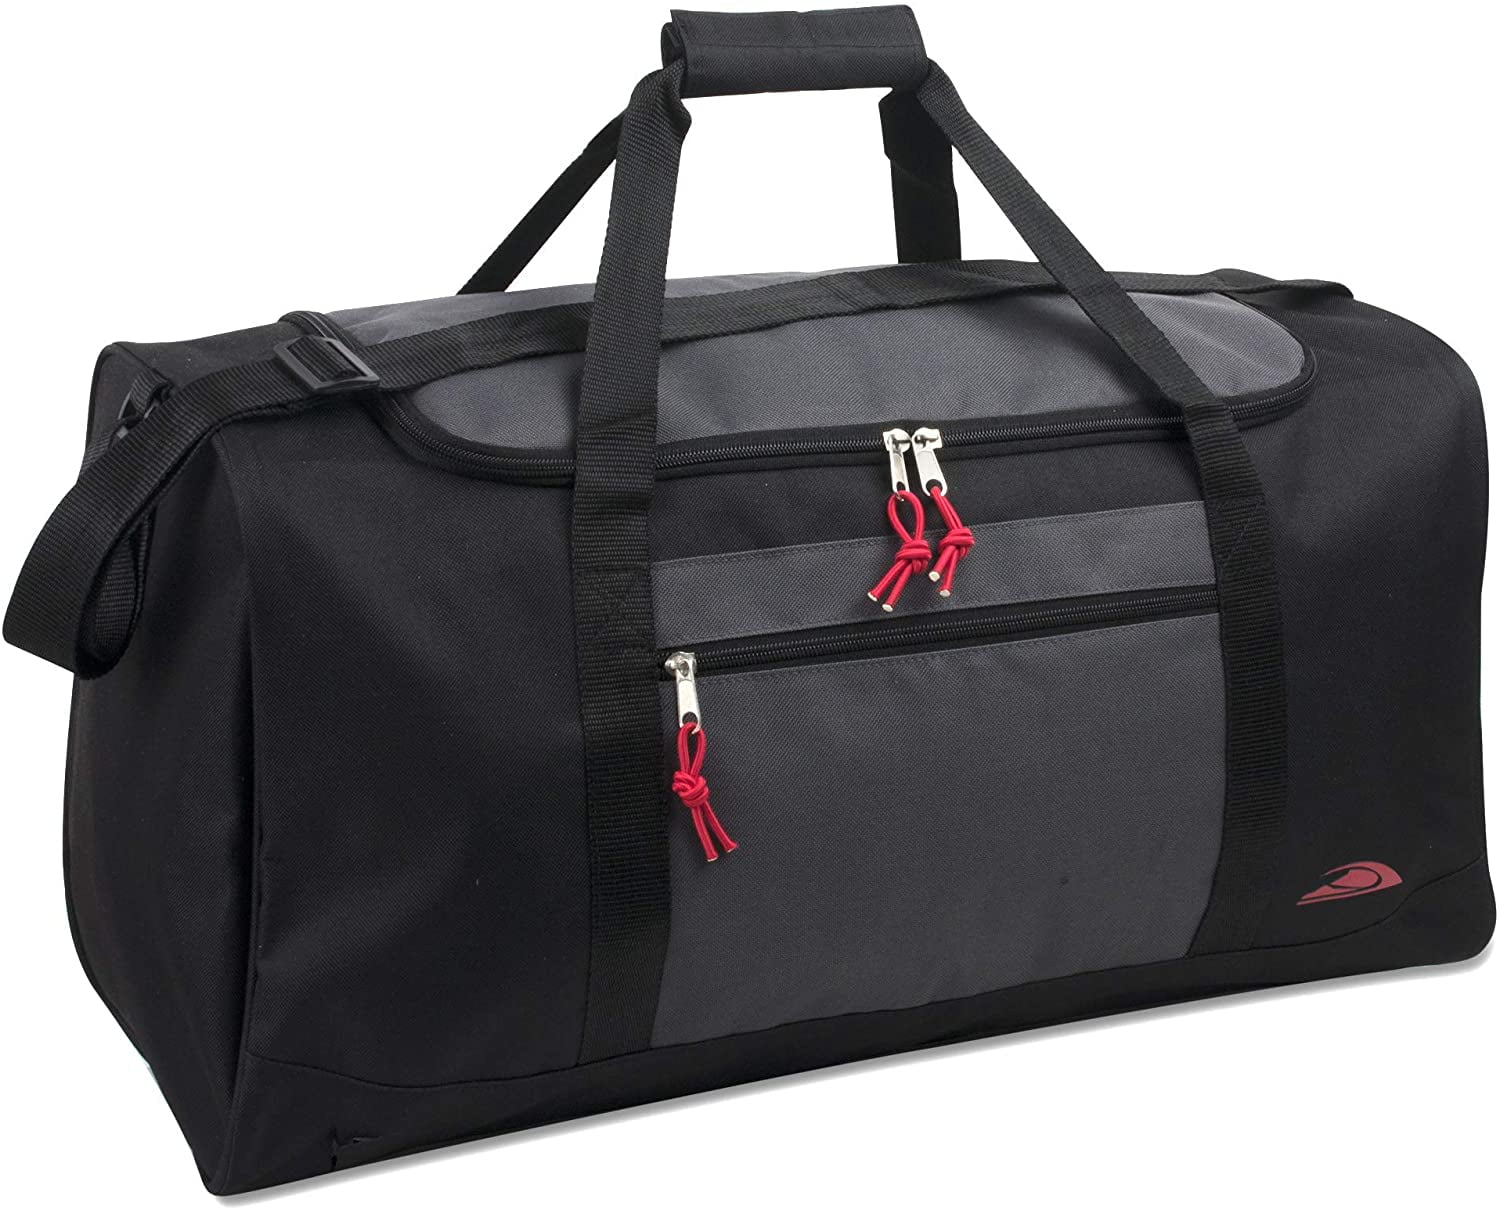 and as Sports Equipment Bag/Organizer the Gym Black 1 Lightweight Canvas Duffle Bags for Men & Women For Traveling 